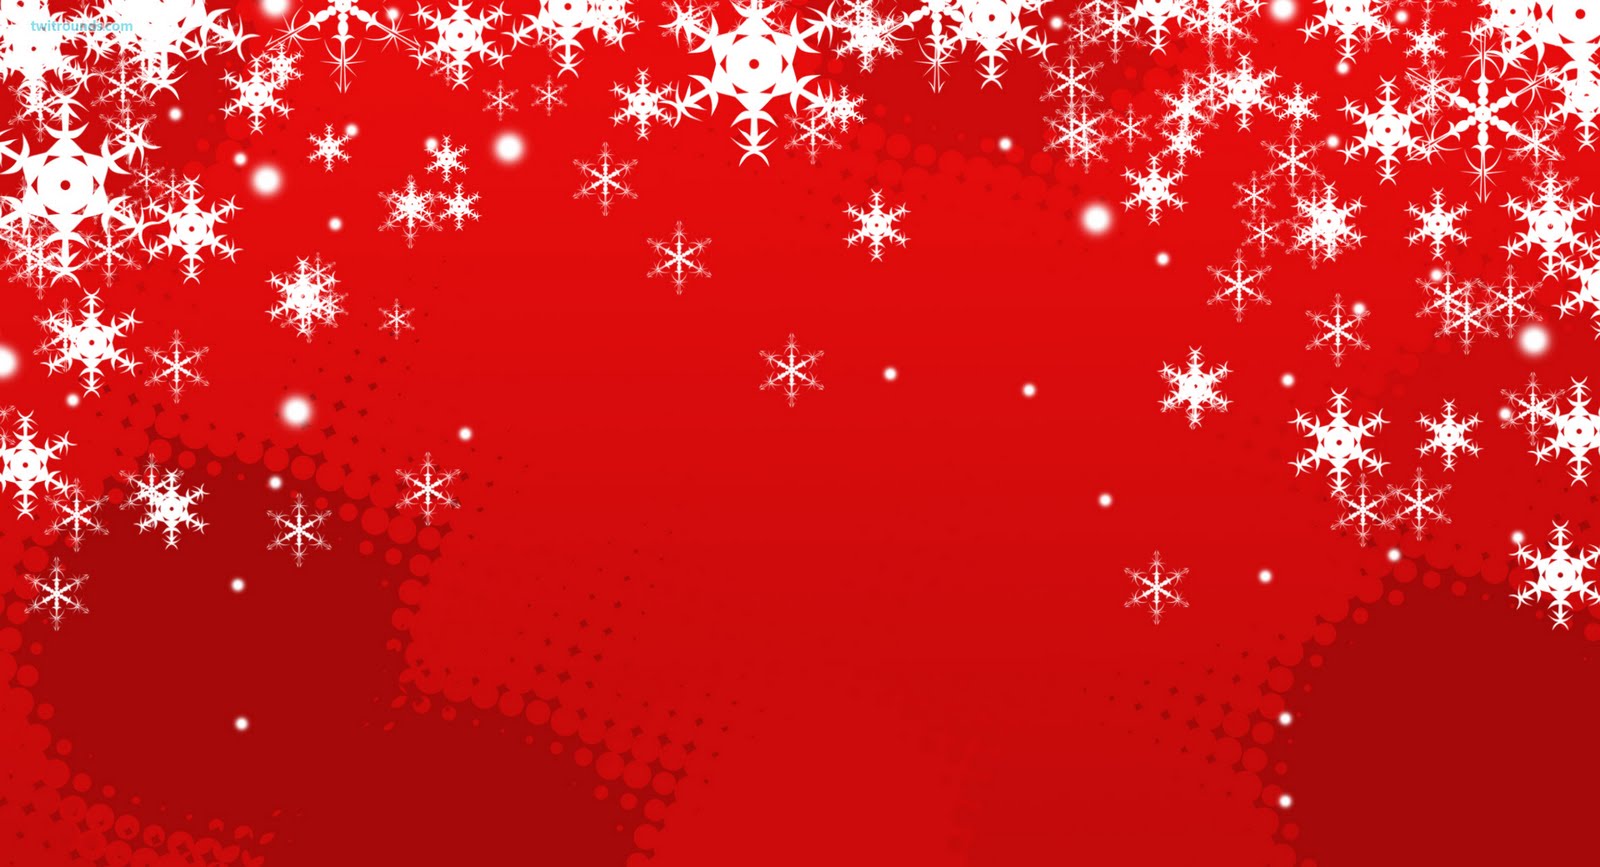 Christmas Snowflakes Clipart Images And Desktop Background Wallpapers